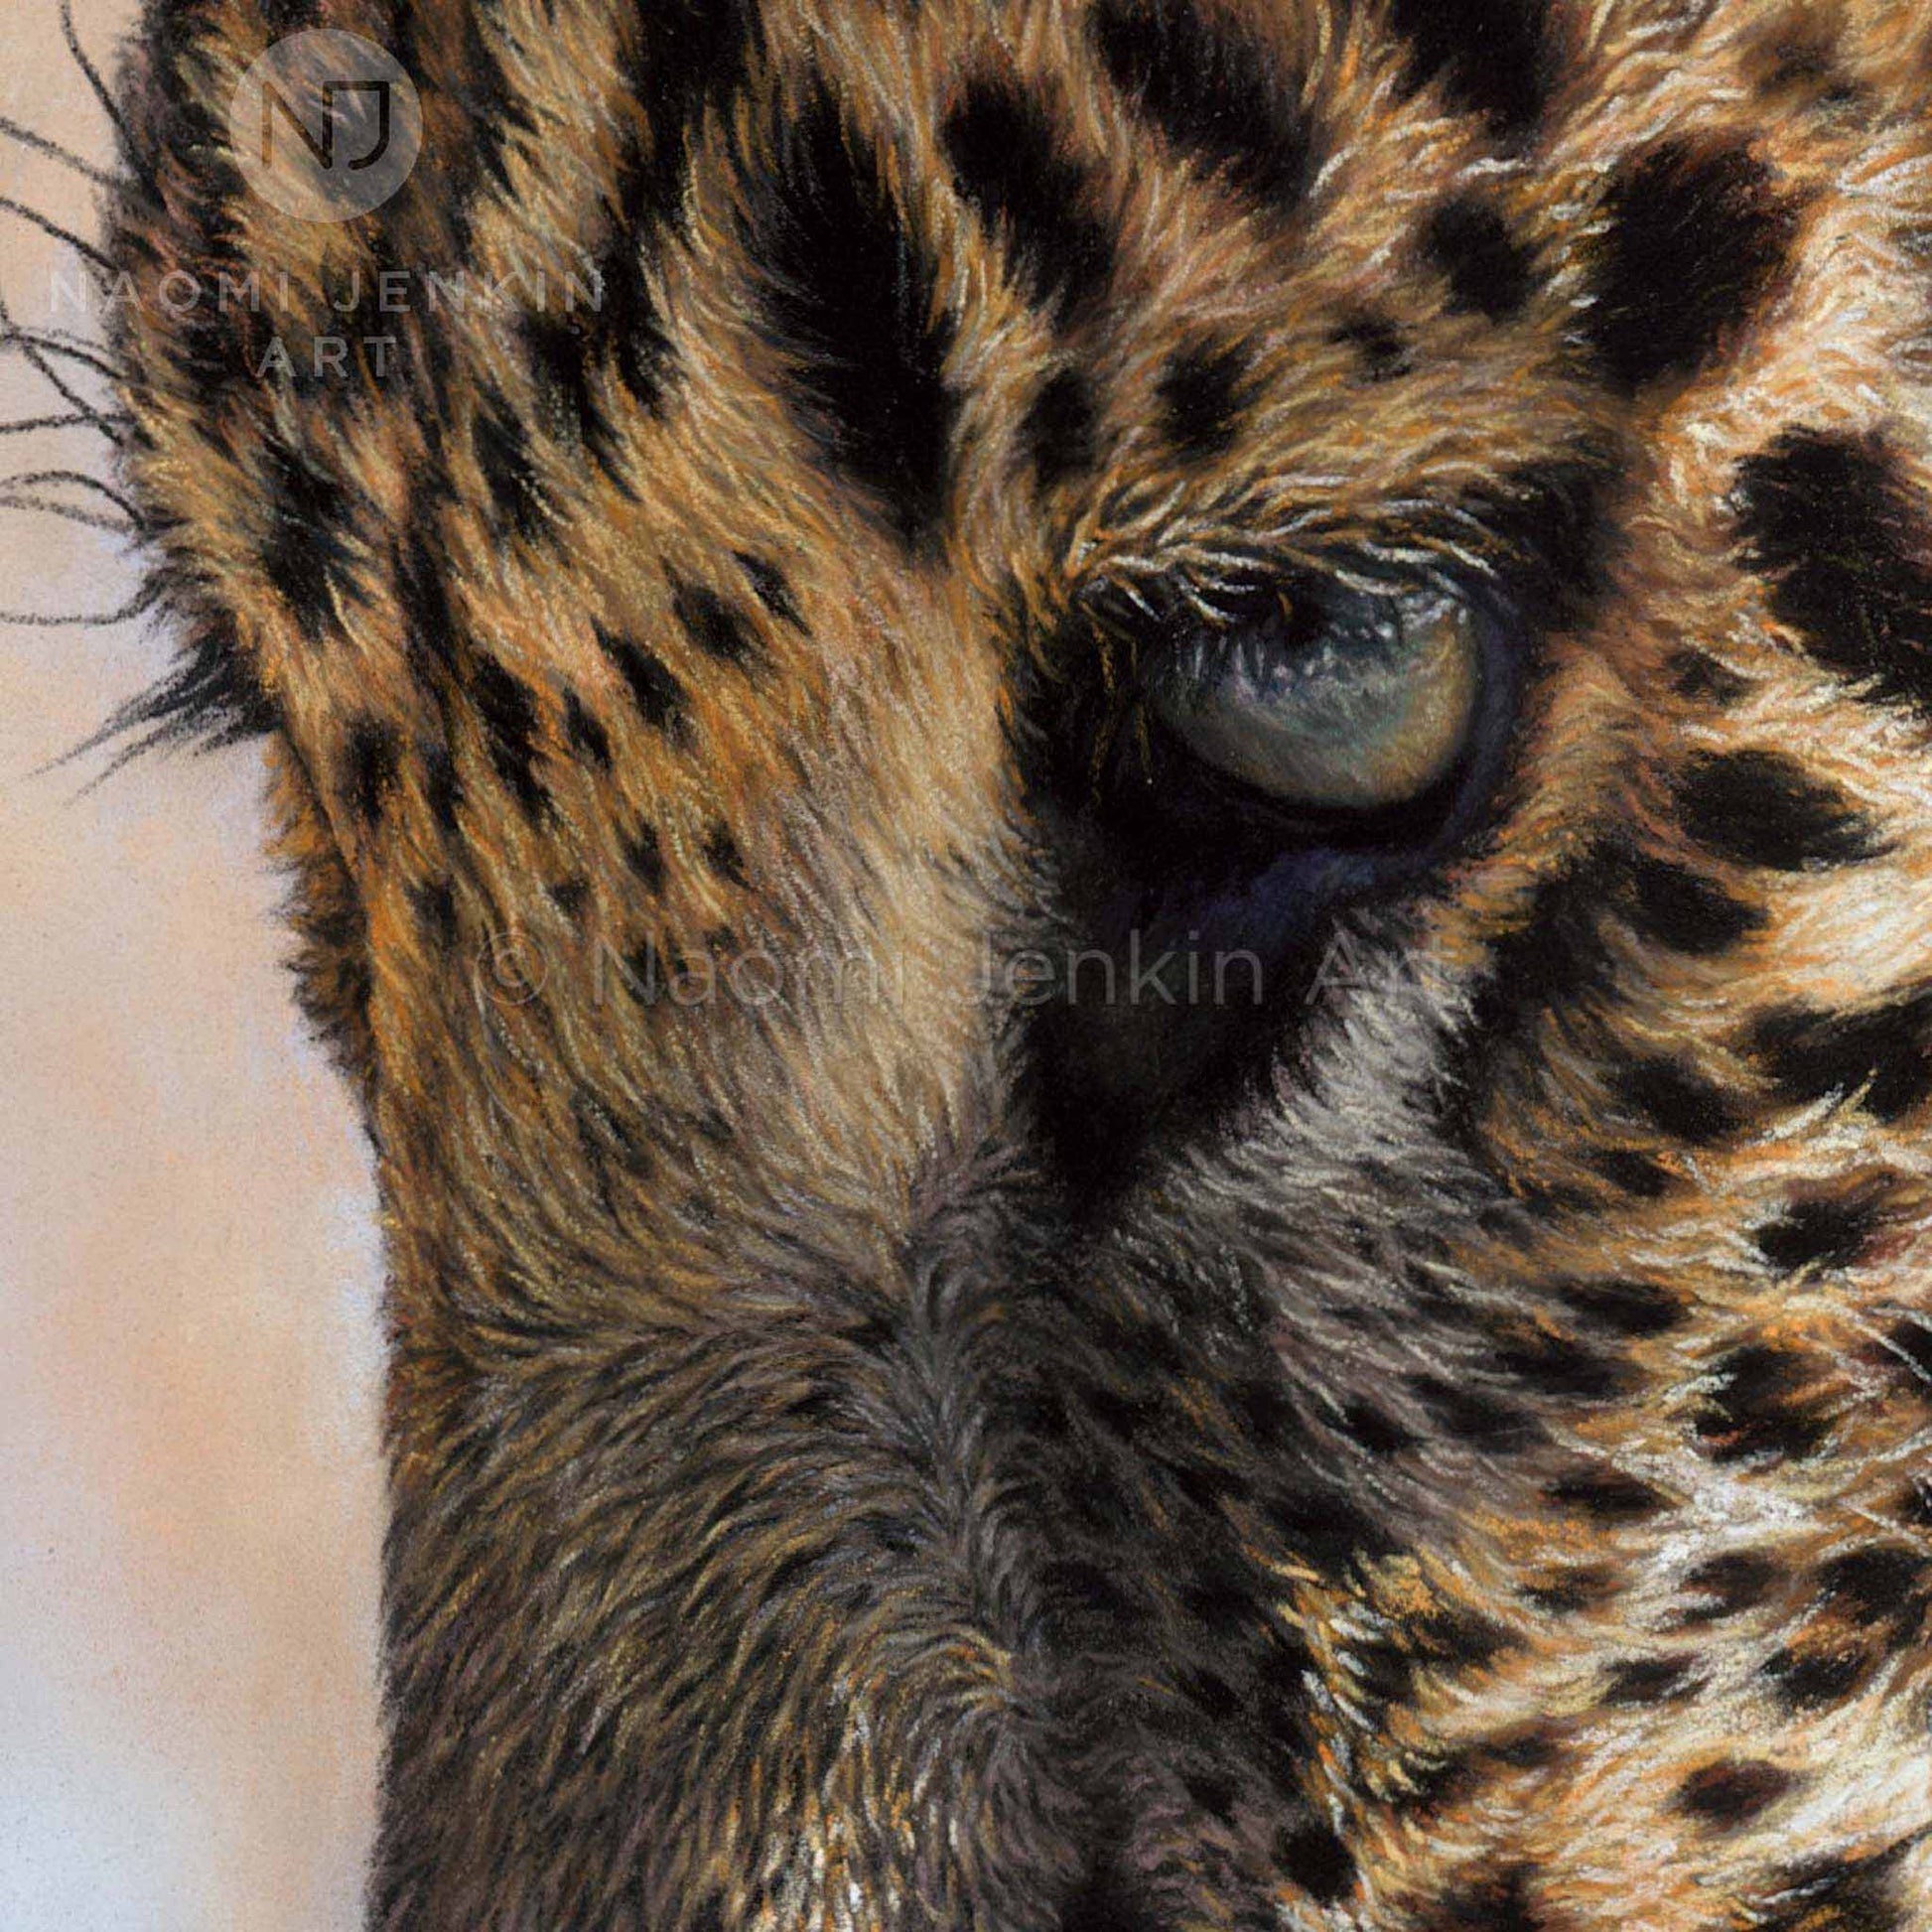 Leopard eye close up from the 'Eye to Eye' leopard painting by Naomi Jenkin